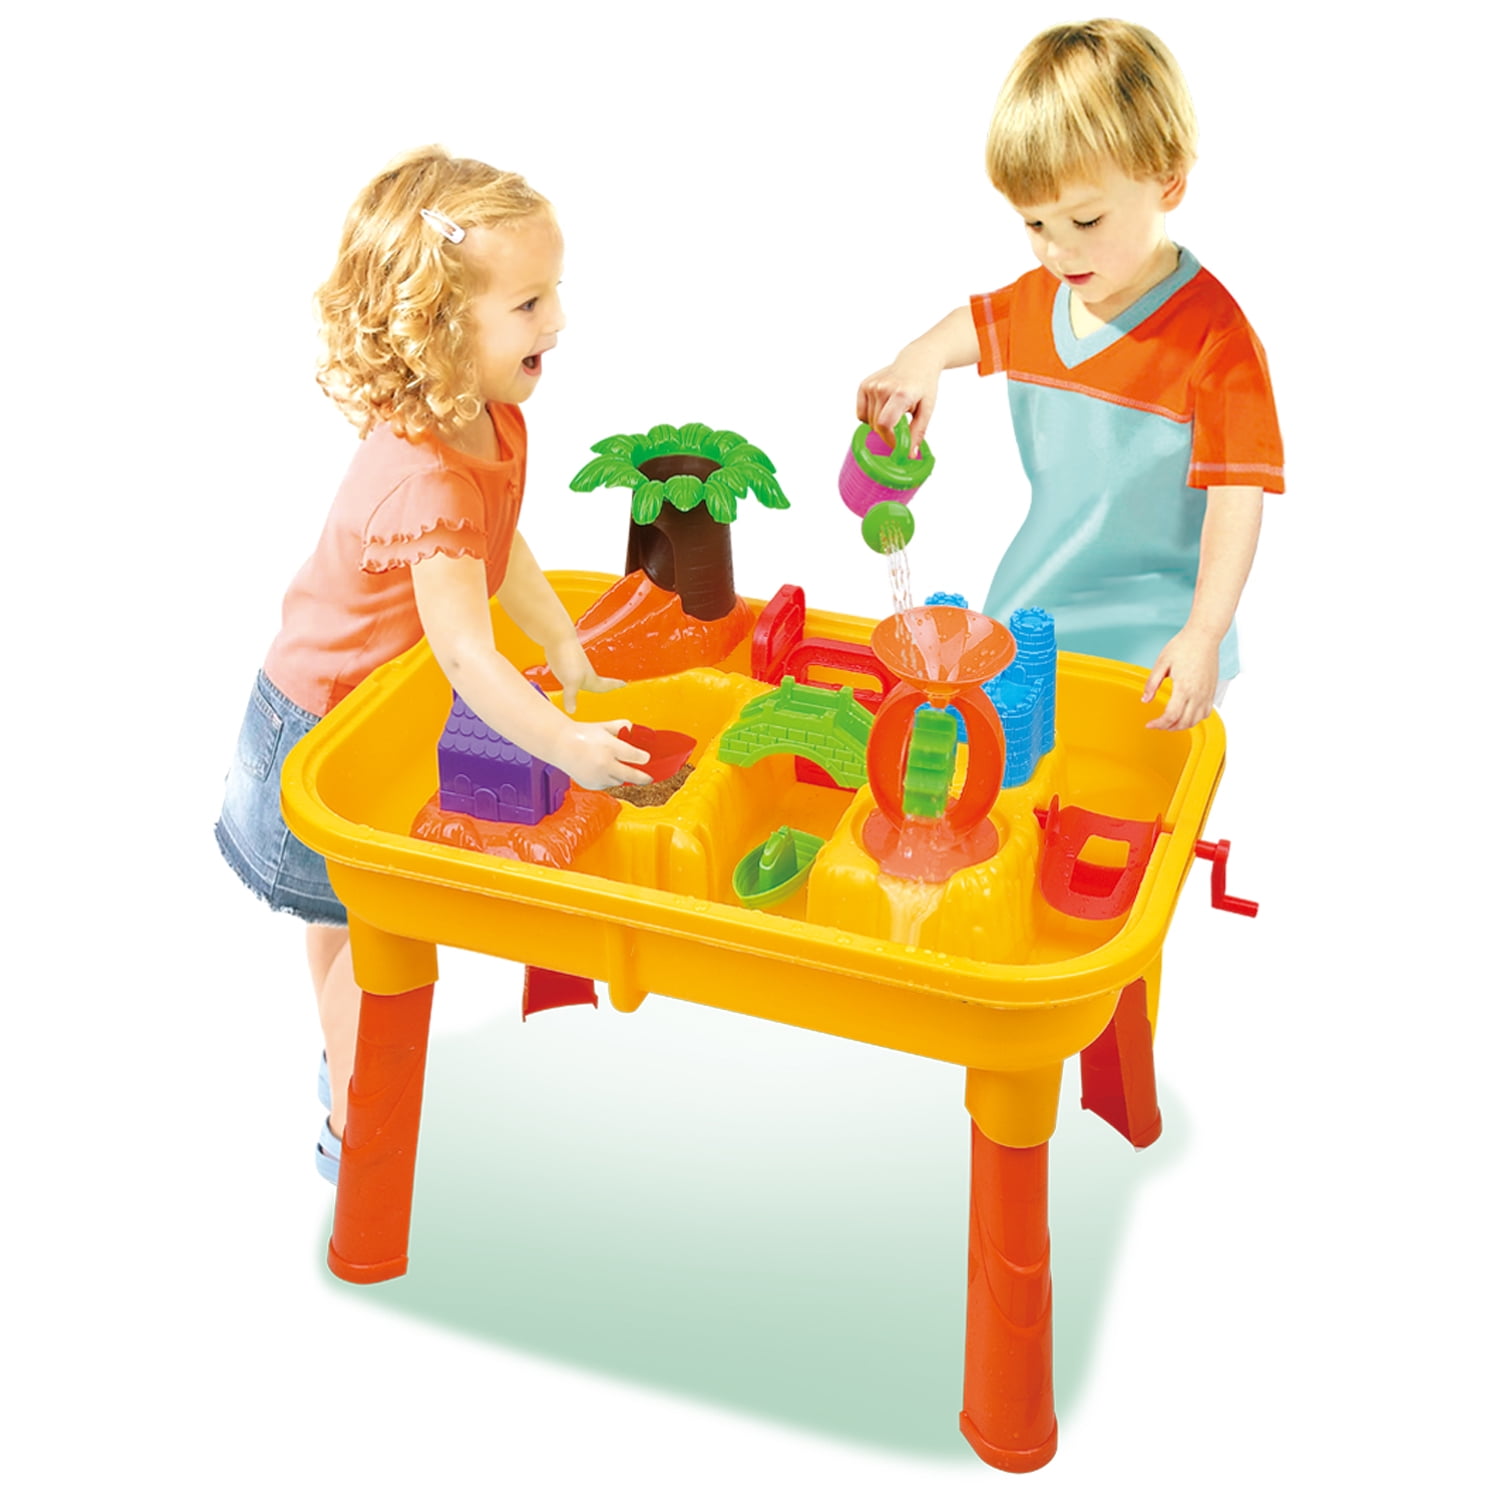 Sand and Water Activity Table Play Set educational play for kids AU 